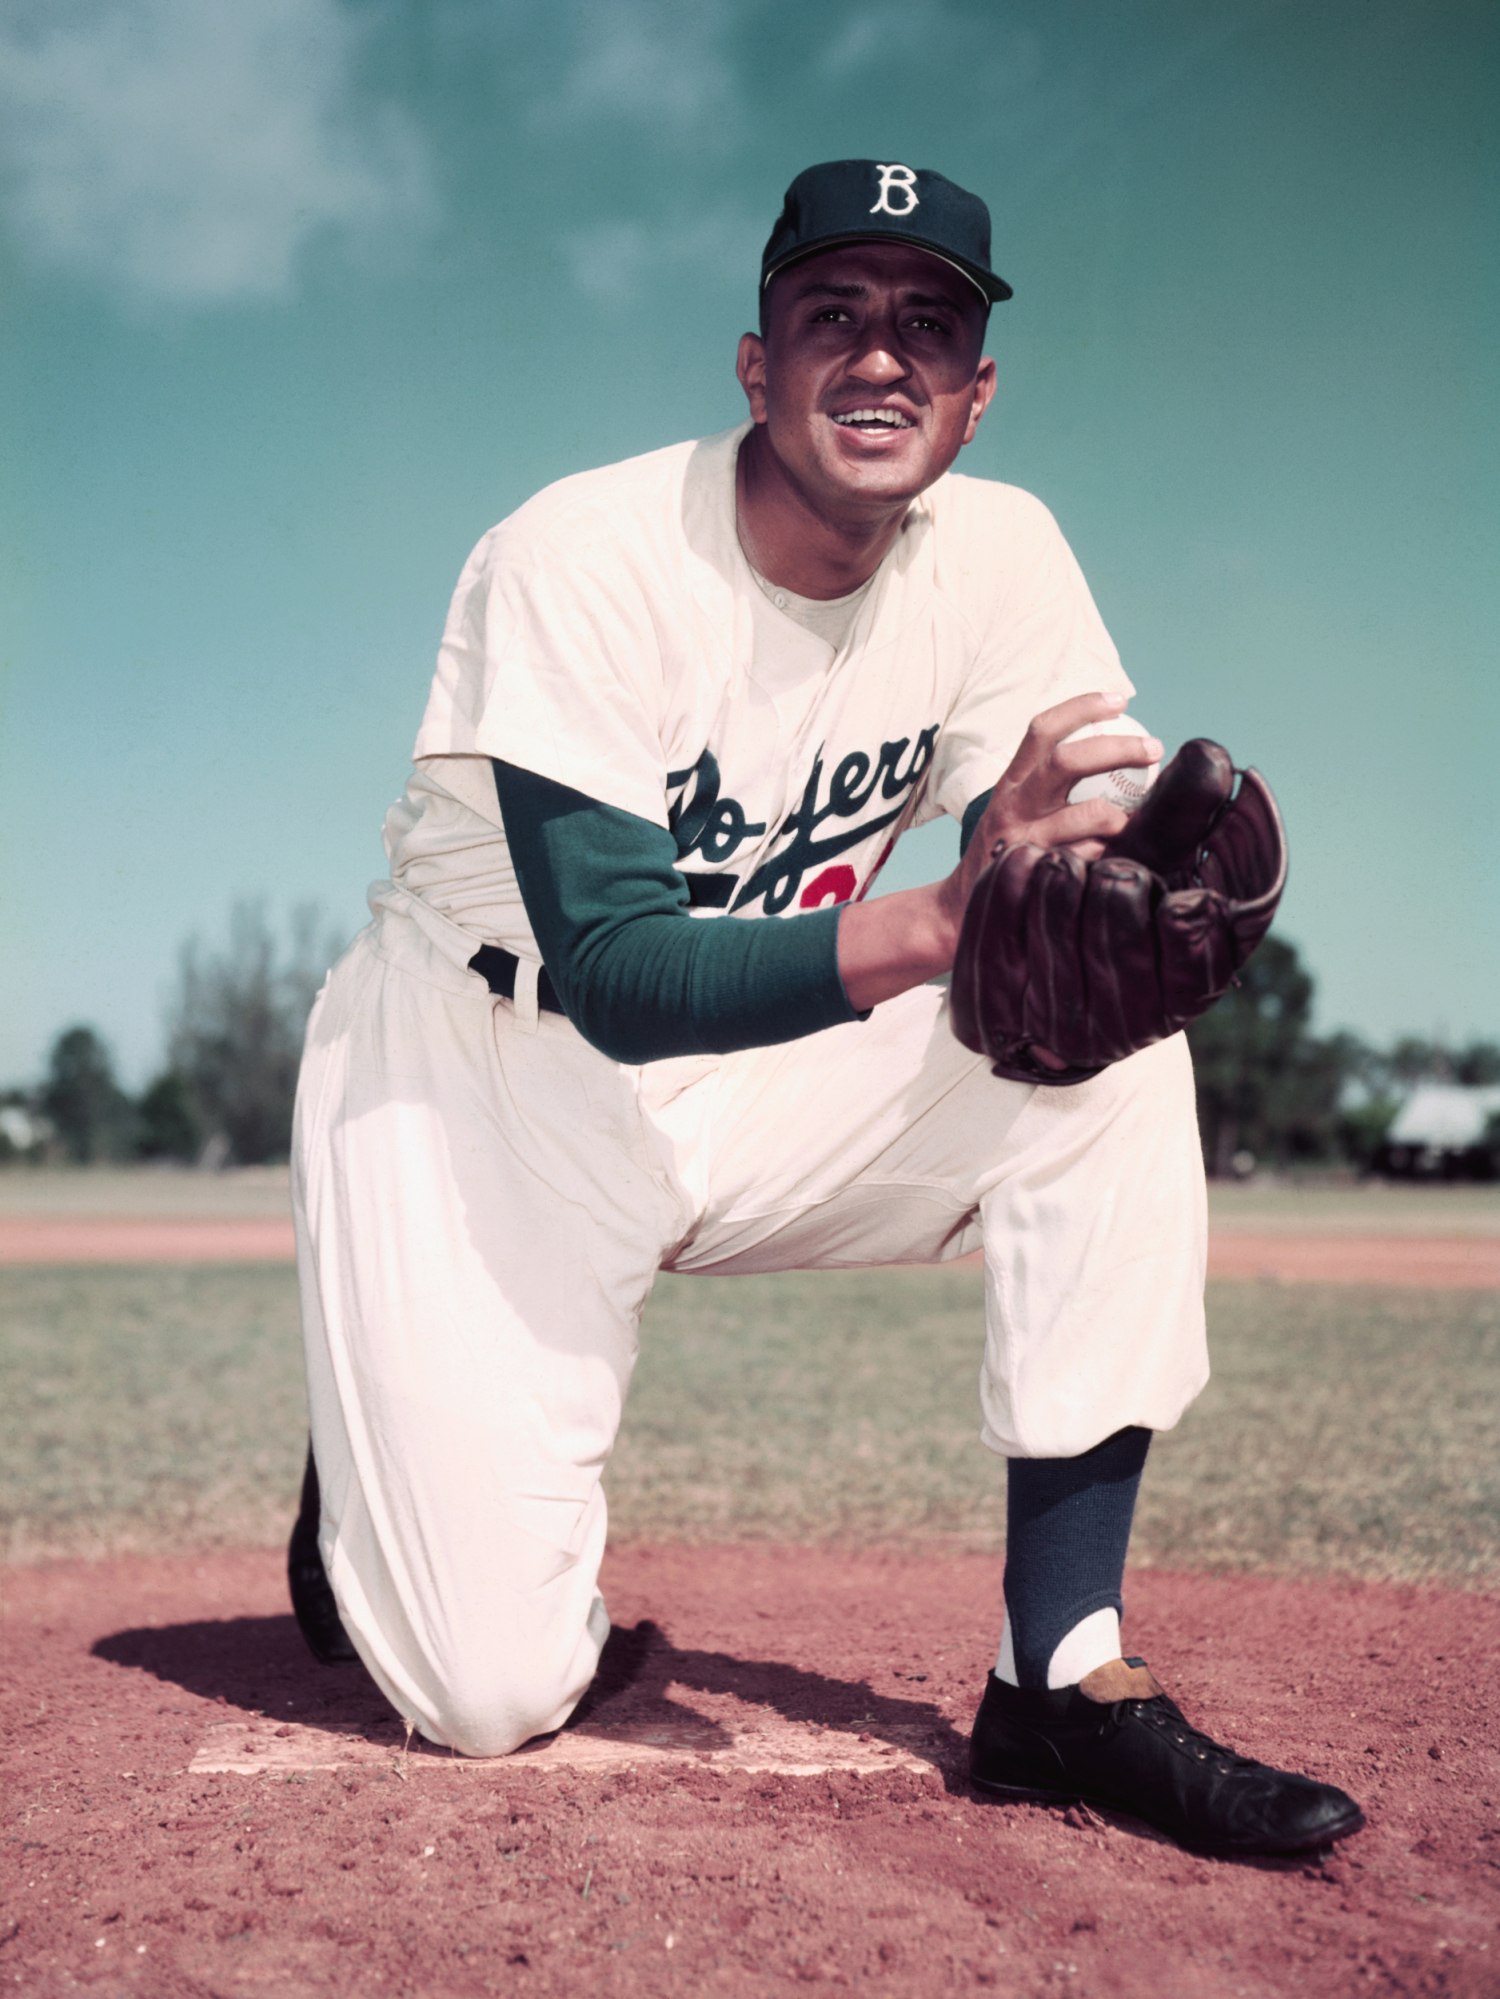 380 Don Newcombe” Baseball Stock Photos, High-Res Pictures, and Images -  Getty Images